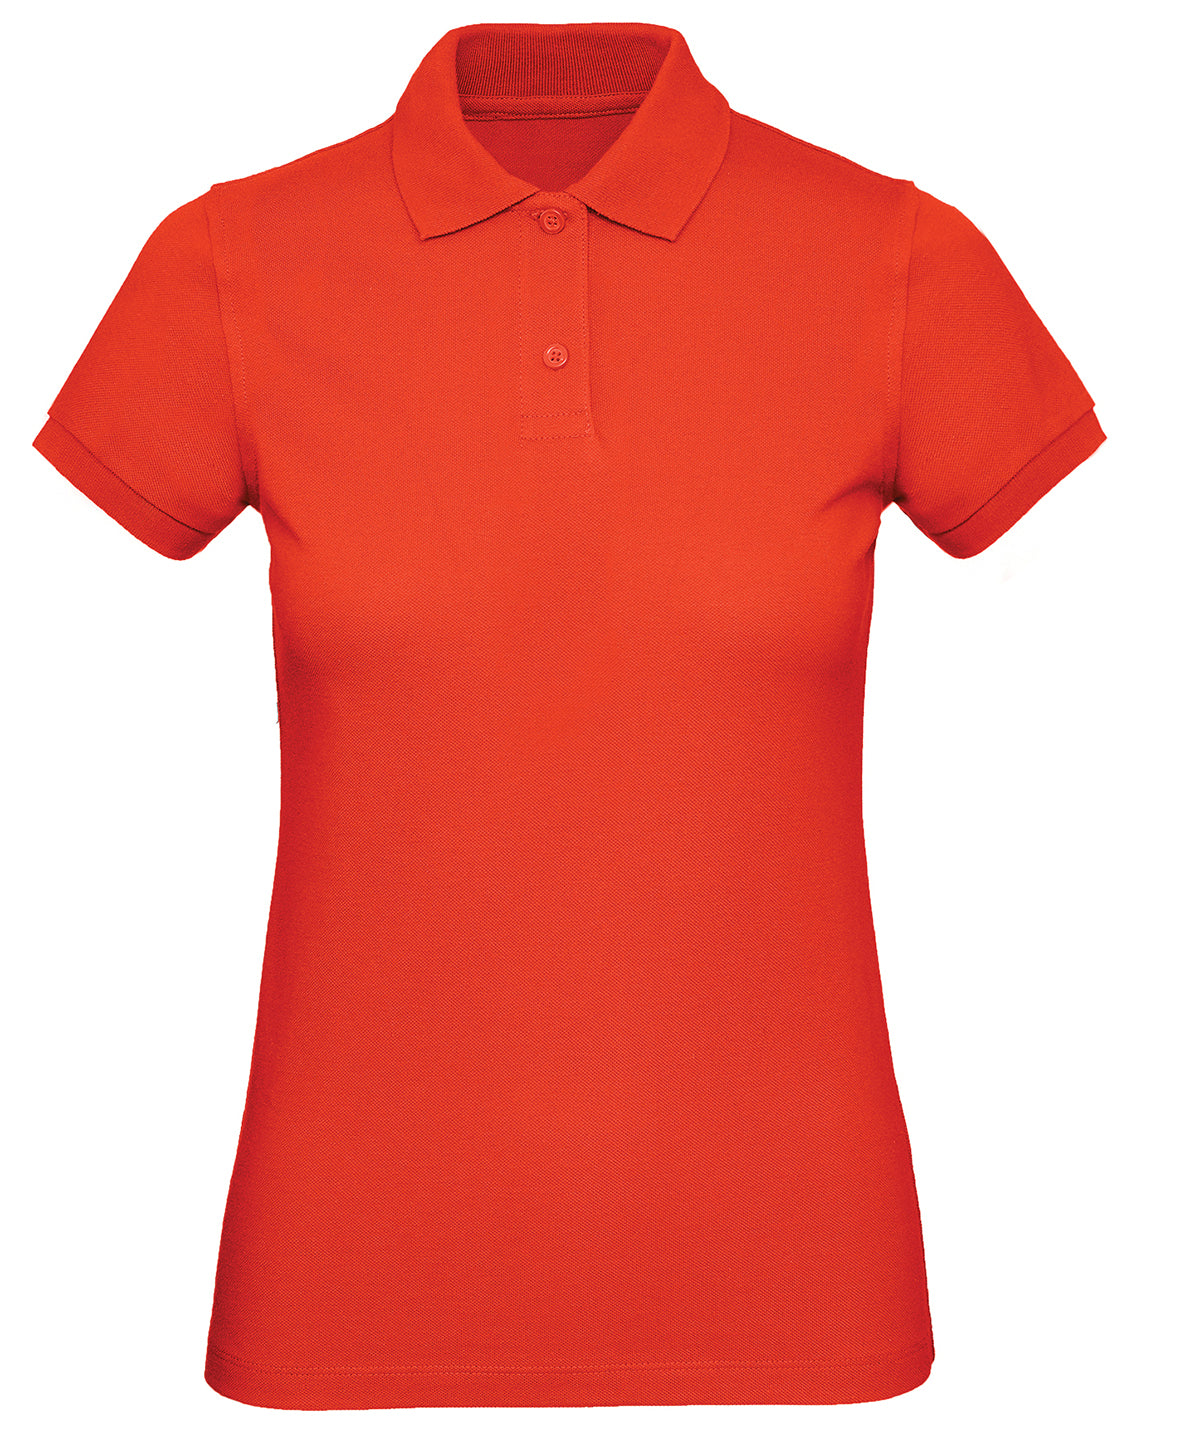 Personalised Polo Shirts - Bottle B&C Collection B&C Inspire Polo /women